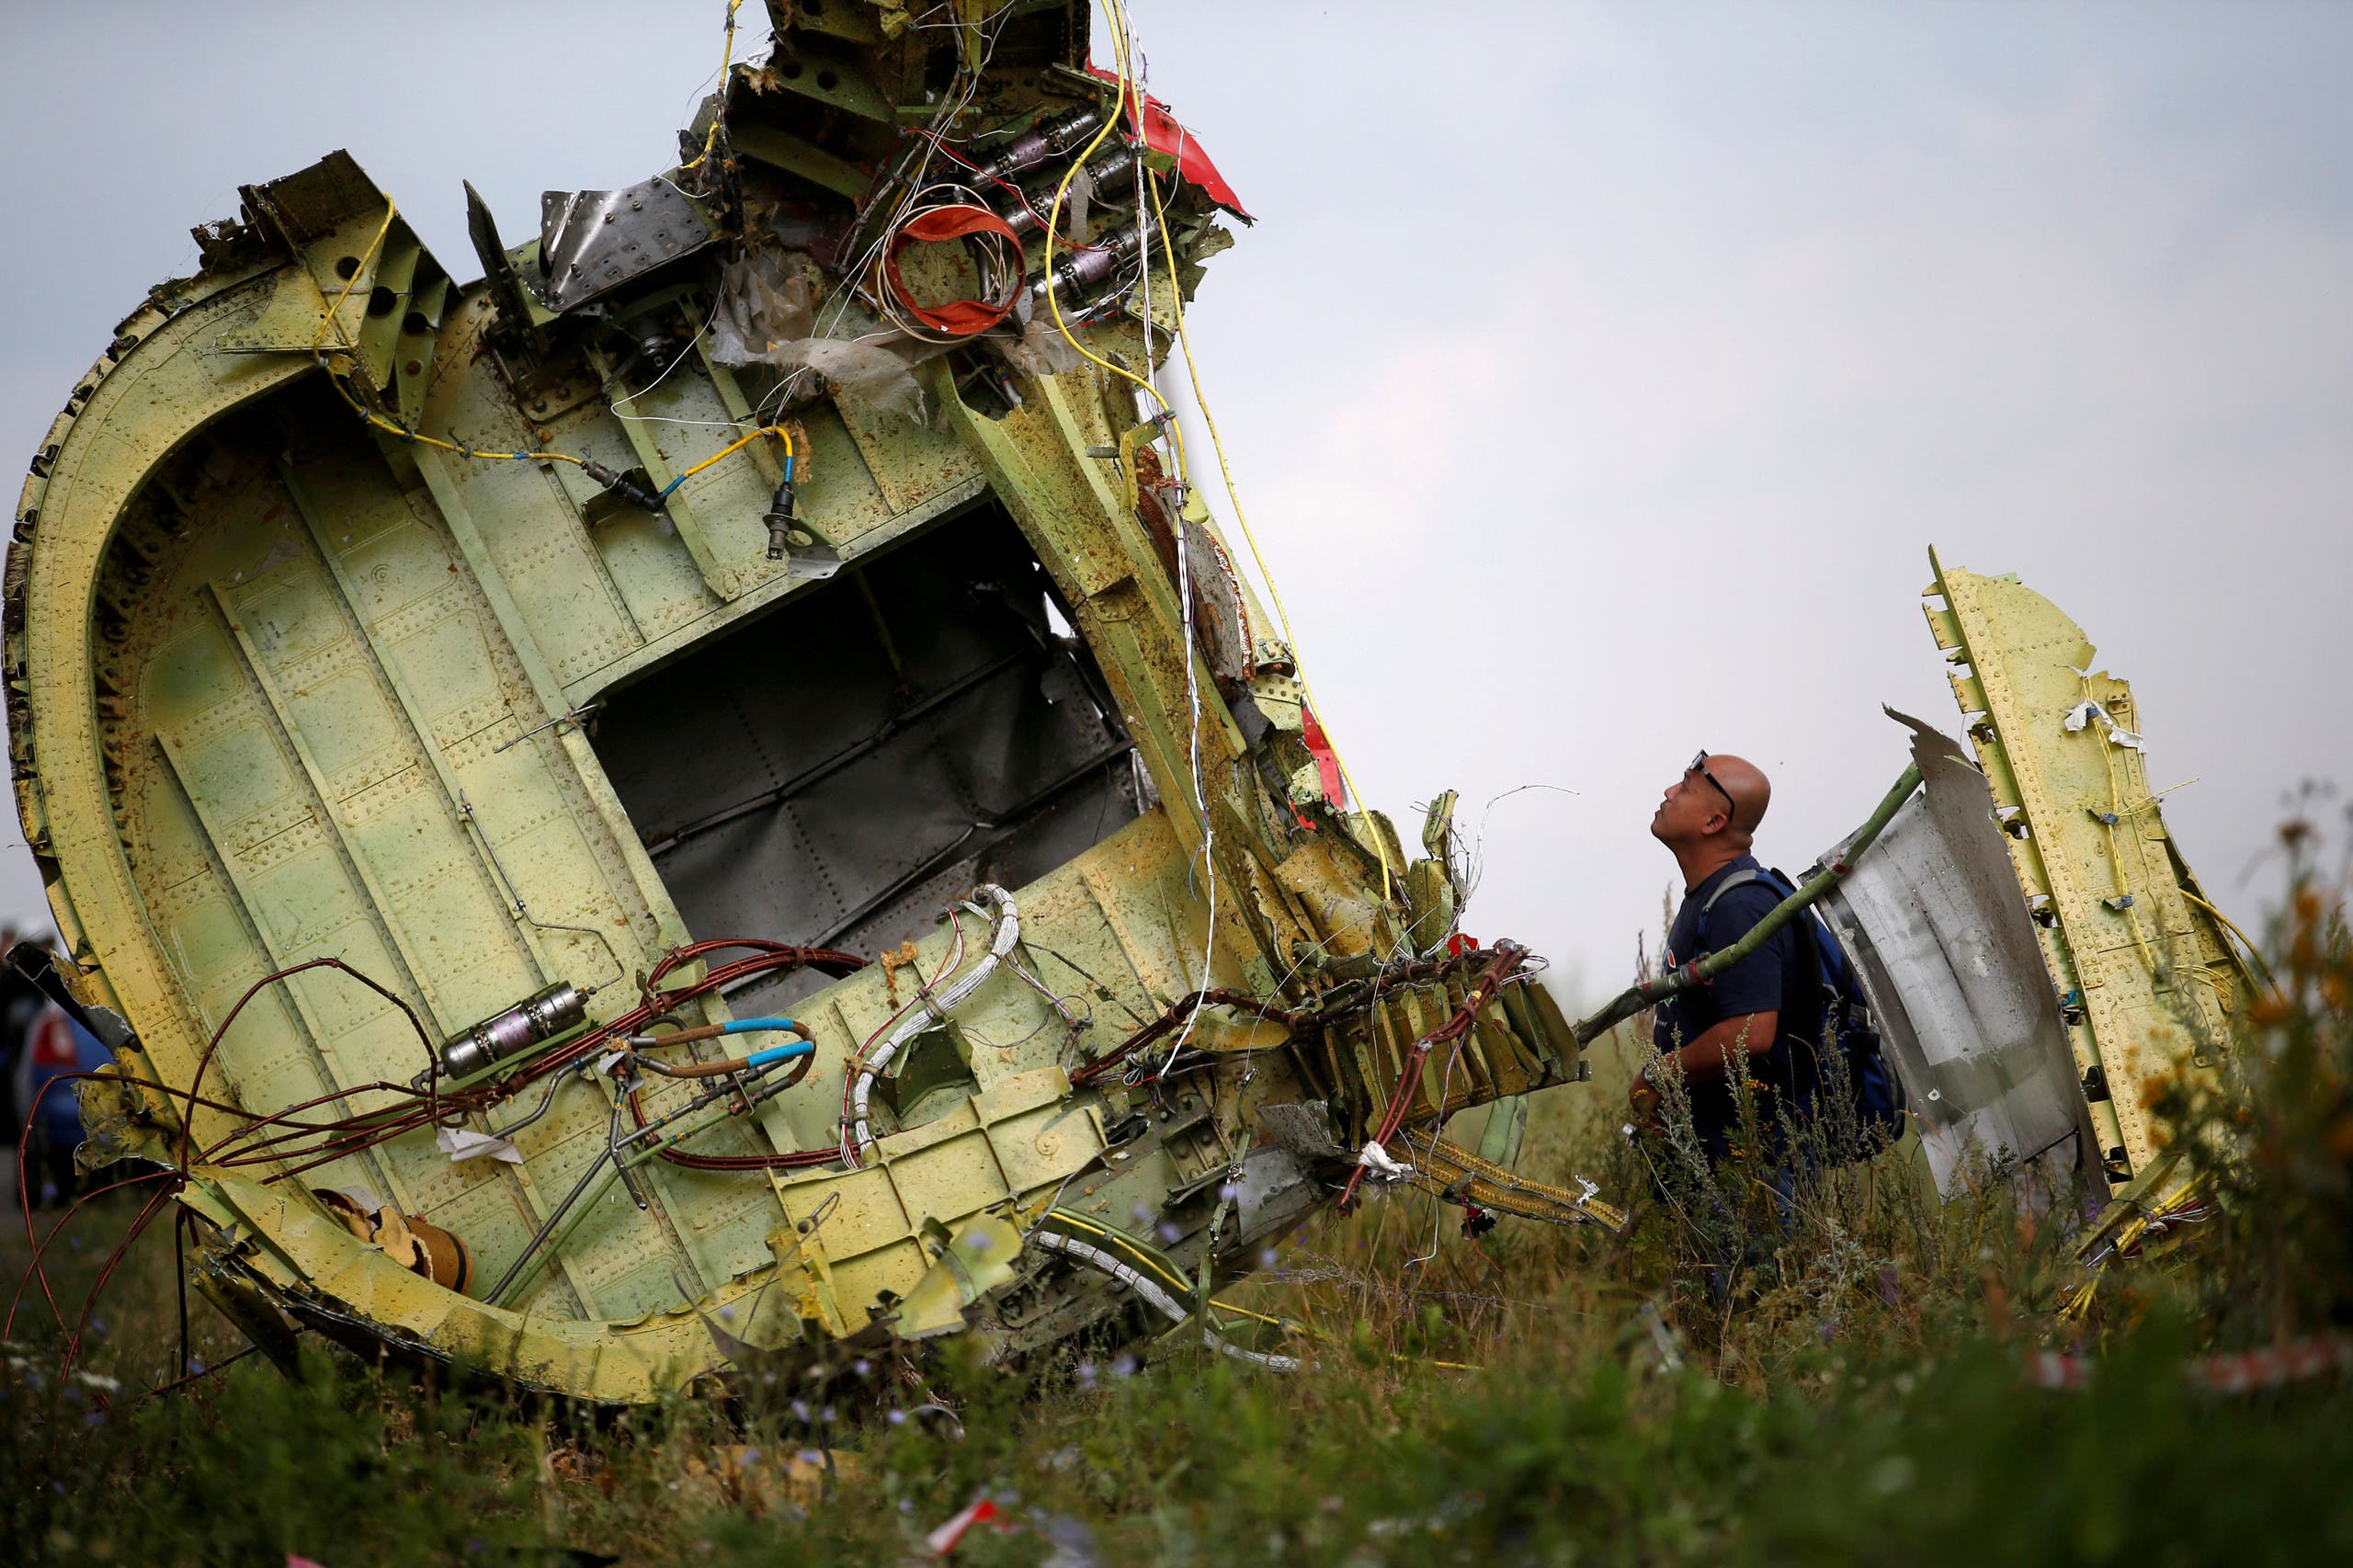  A Malaysian air crash investigator inspects the crash site of Malaysia Airlines Flight MH17, near the village of Hrabove (Grabovo) in Donetsk region, Ukraine, July 22, 2014. REUTERS/Maxim Zmeyev/File Photo